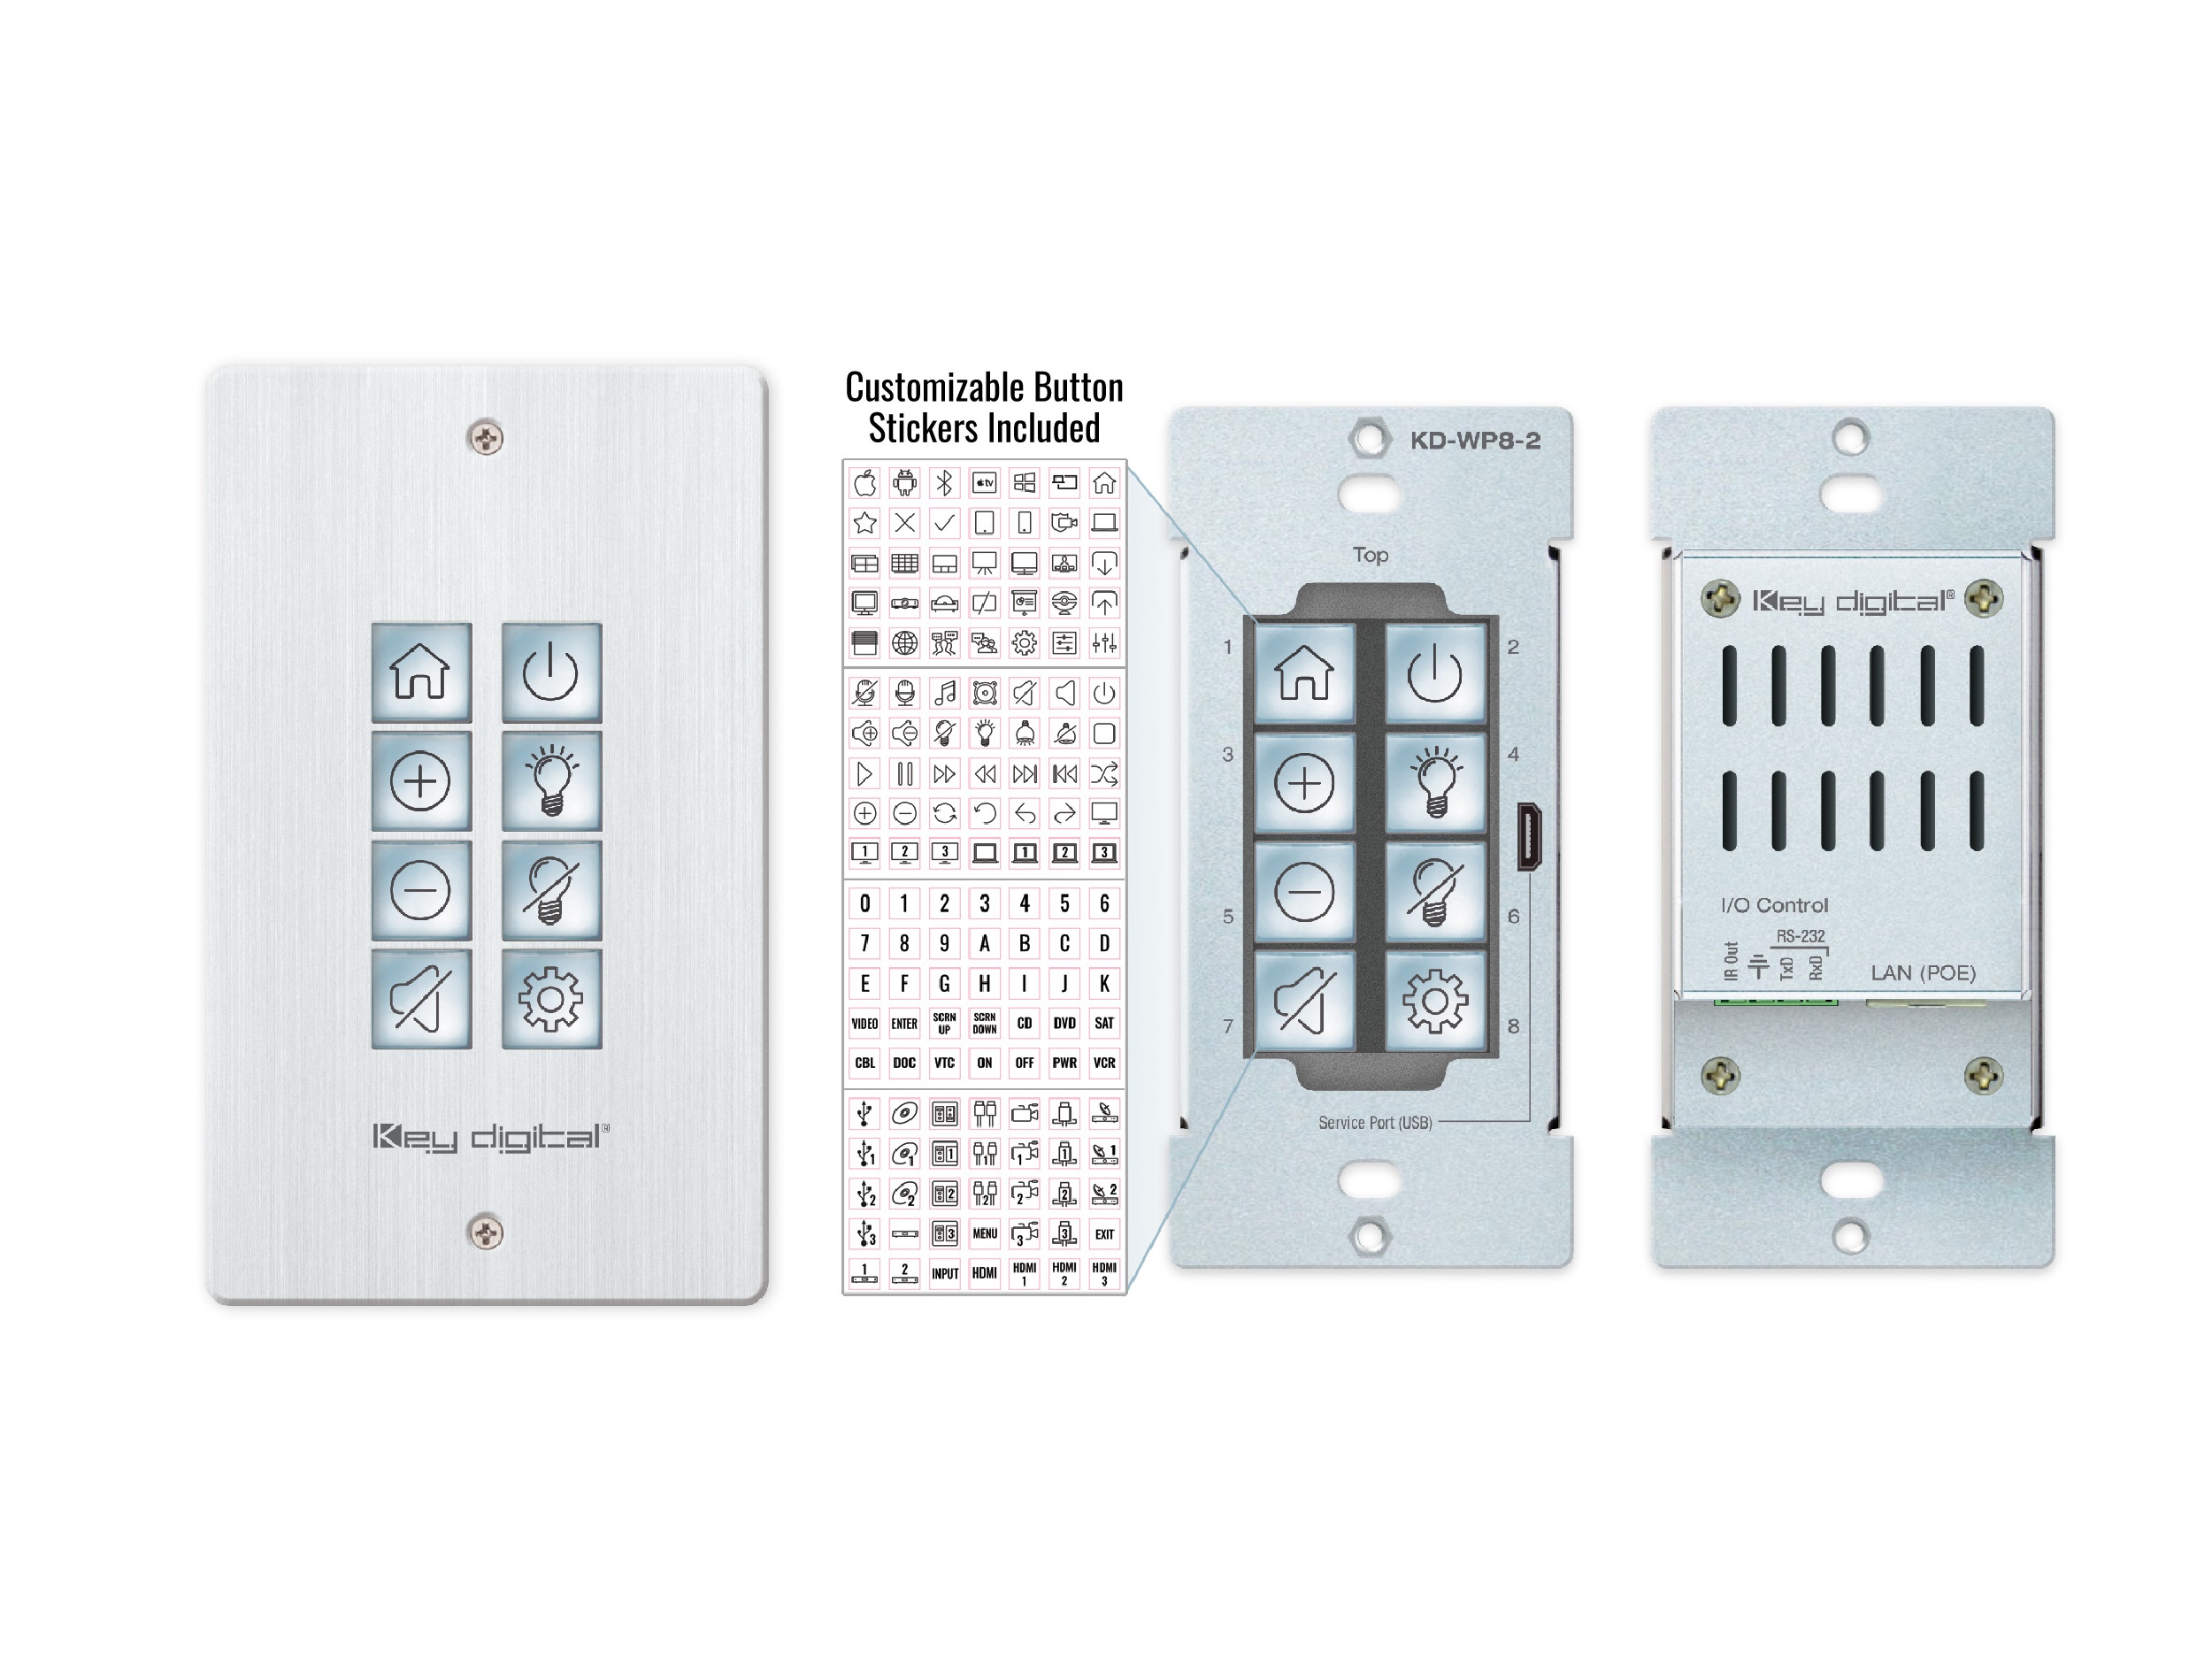 Key Digital KD-WP8-2 8 Button Programmable IP/IR/RS-232 Wall Plate Control Keypad with PoE for KDPlug and Present/Compass Control Pro and Third-Party Systems via Open API